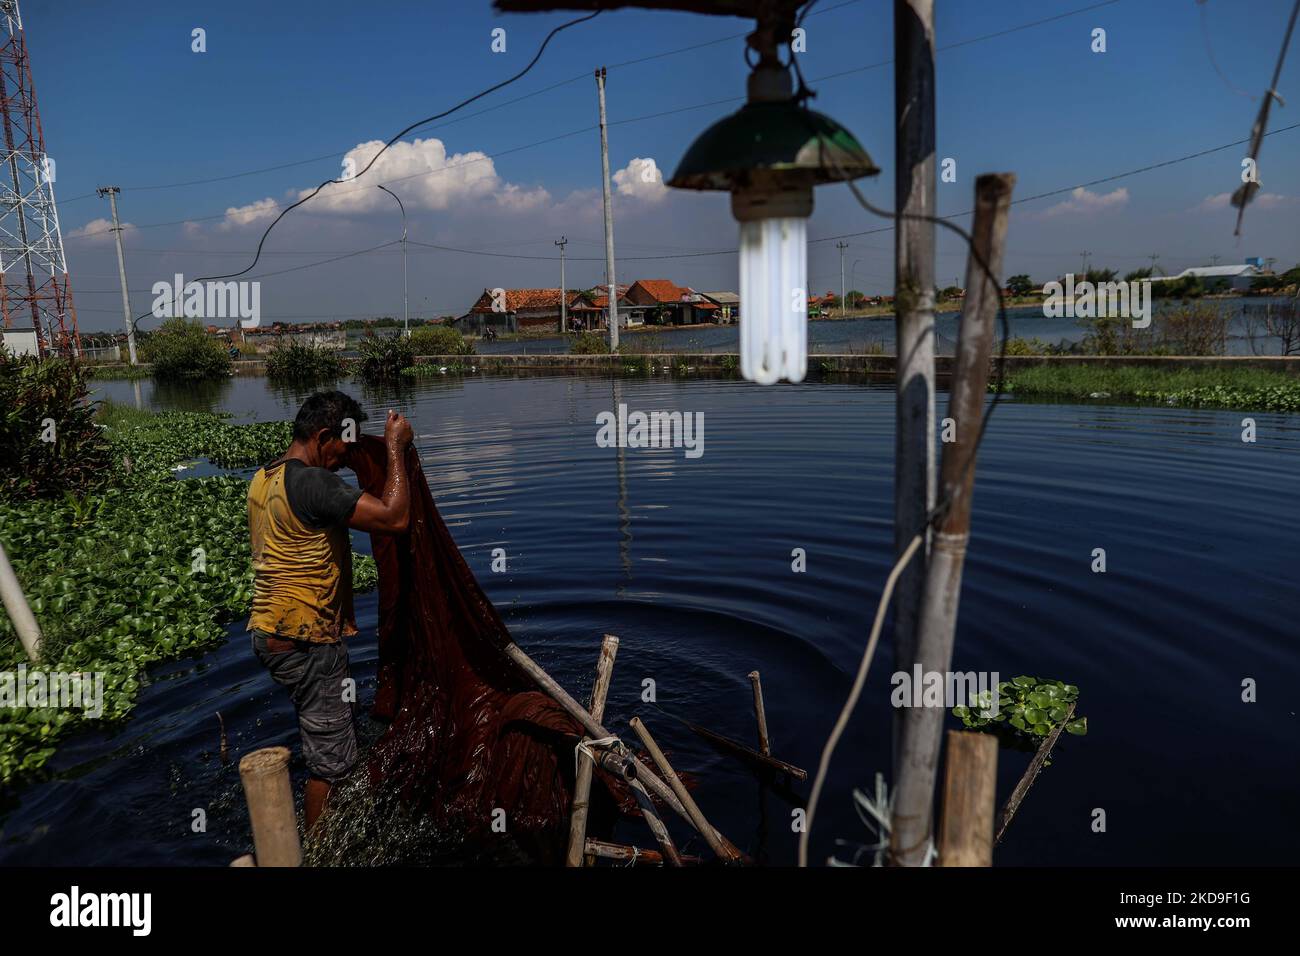 A man washes batik cloth at a polluted river in Pekalongan slum, Central Java, Indonesia, on June 5, 2021. An area in which almost every available space is used for batik production, with a high level of poverty, vulnerable to both rising sea levels and high river peak flows. They hangs and washes at a polluted river for process traditional Javanese textile called Batik. Batik is a traditional Indonesian method of using wax to resist water-based dyes to depict patterns and drawings on fabric. At the heart of the problem is Pekalongan’s overreliance on groundwater, groundwater is also essential Stock Photo